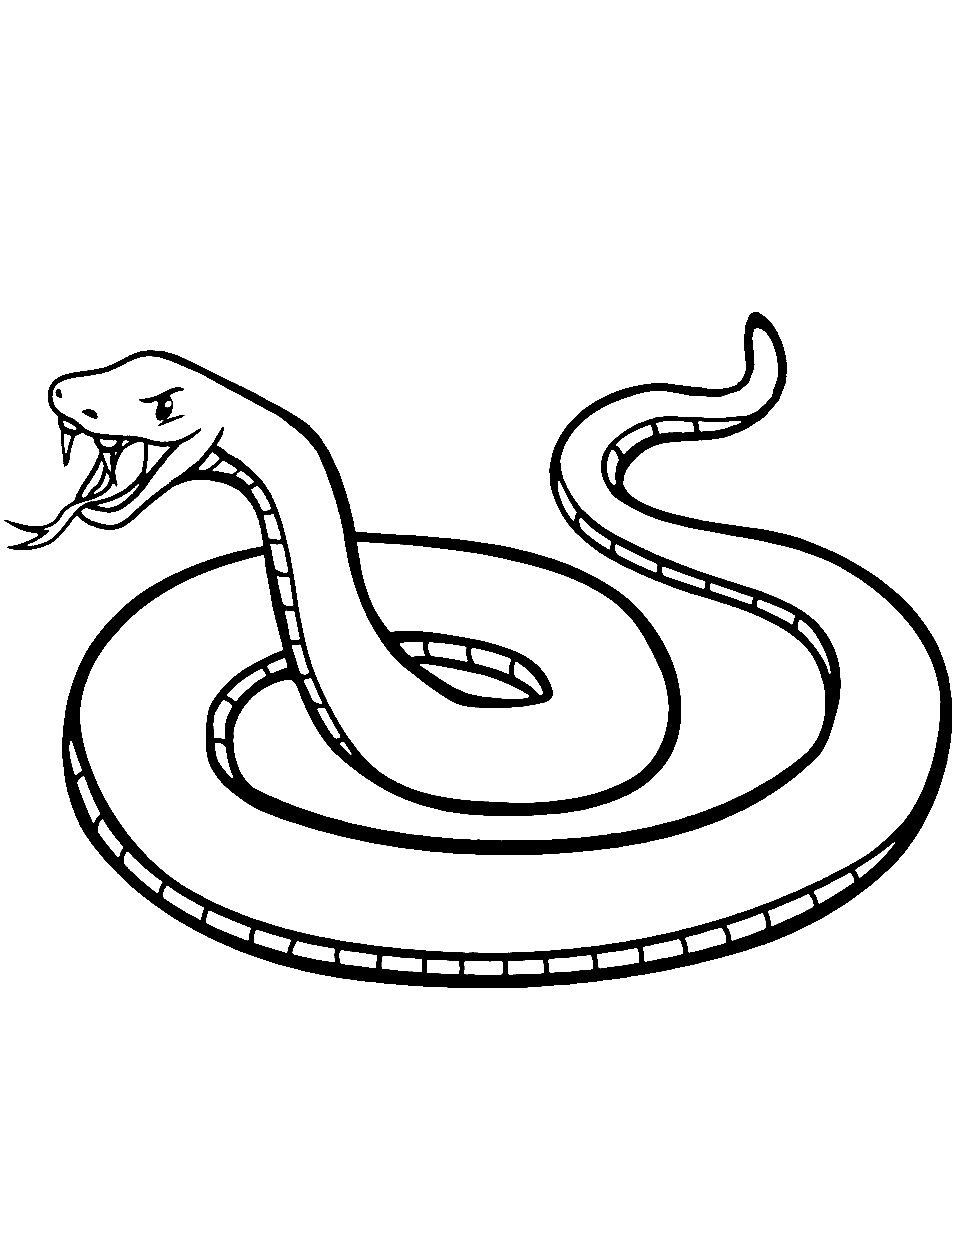 Cool Viper Stance Coloring Page - A viper coiled and ready to strike.